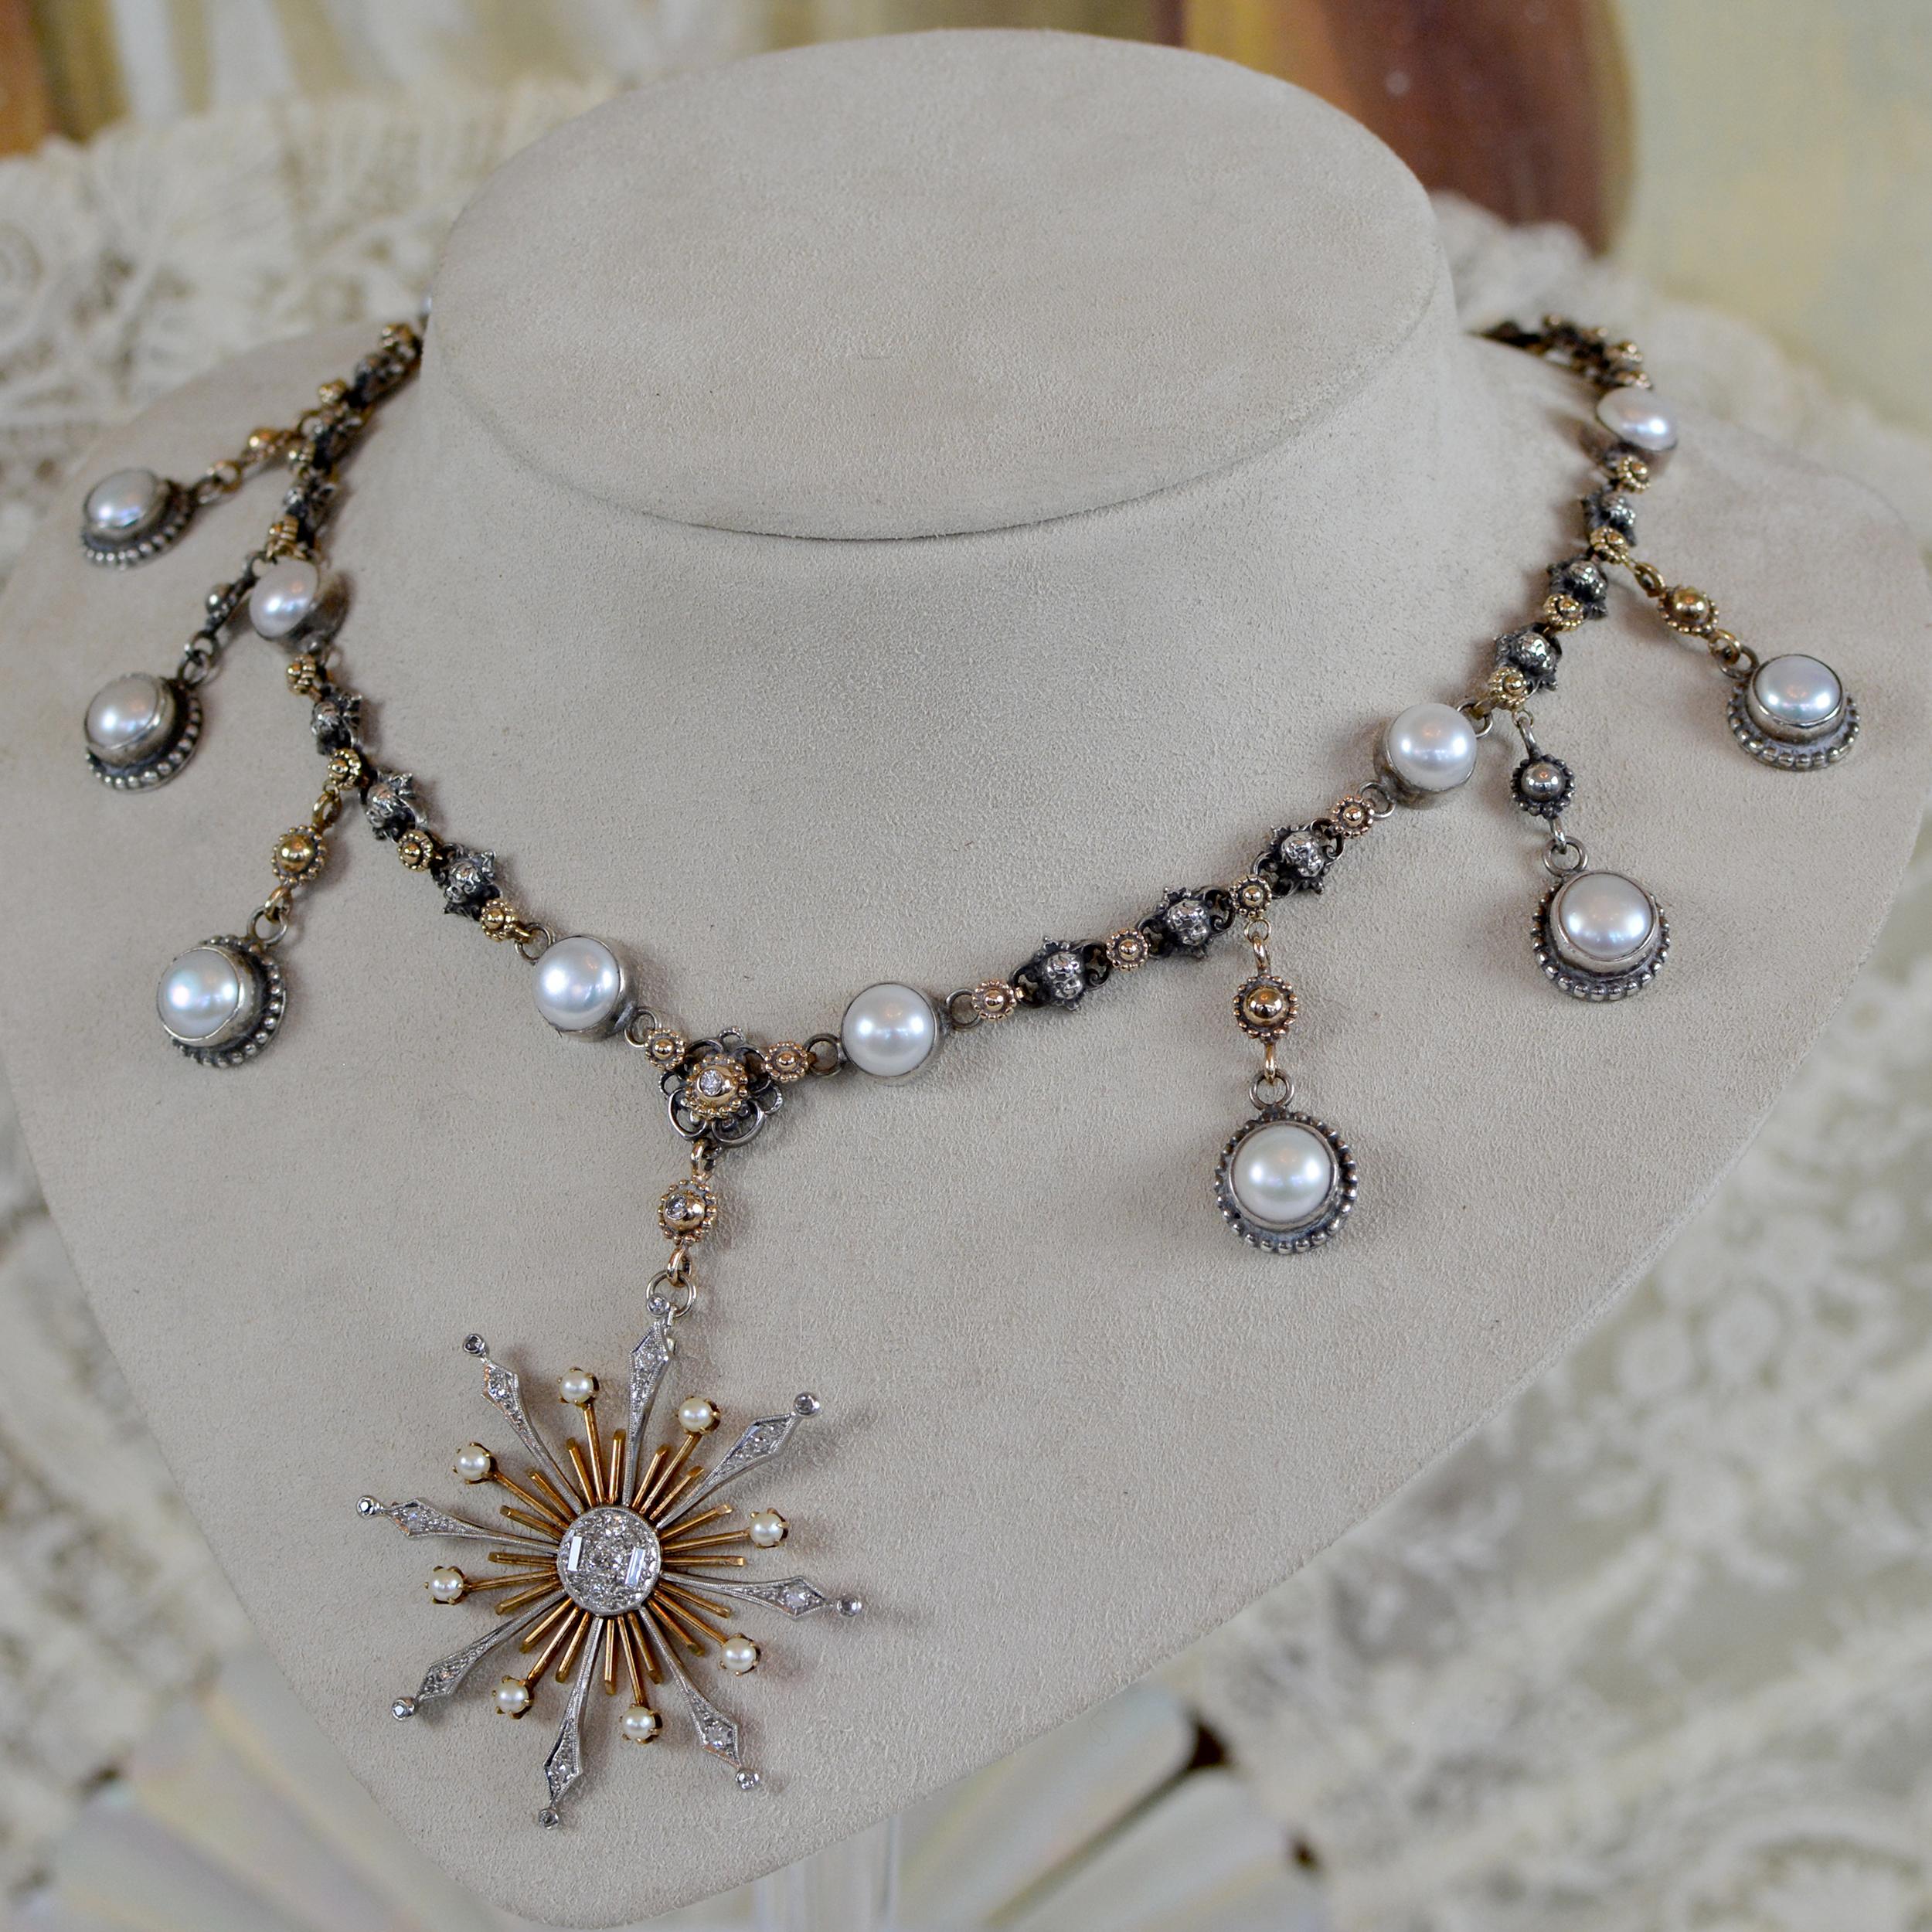 Women's or Men's Jill Garber Diamond and Pearl Starburst Drop Necklace - 14 kt. Gold and Silver For Sale